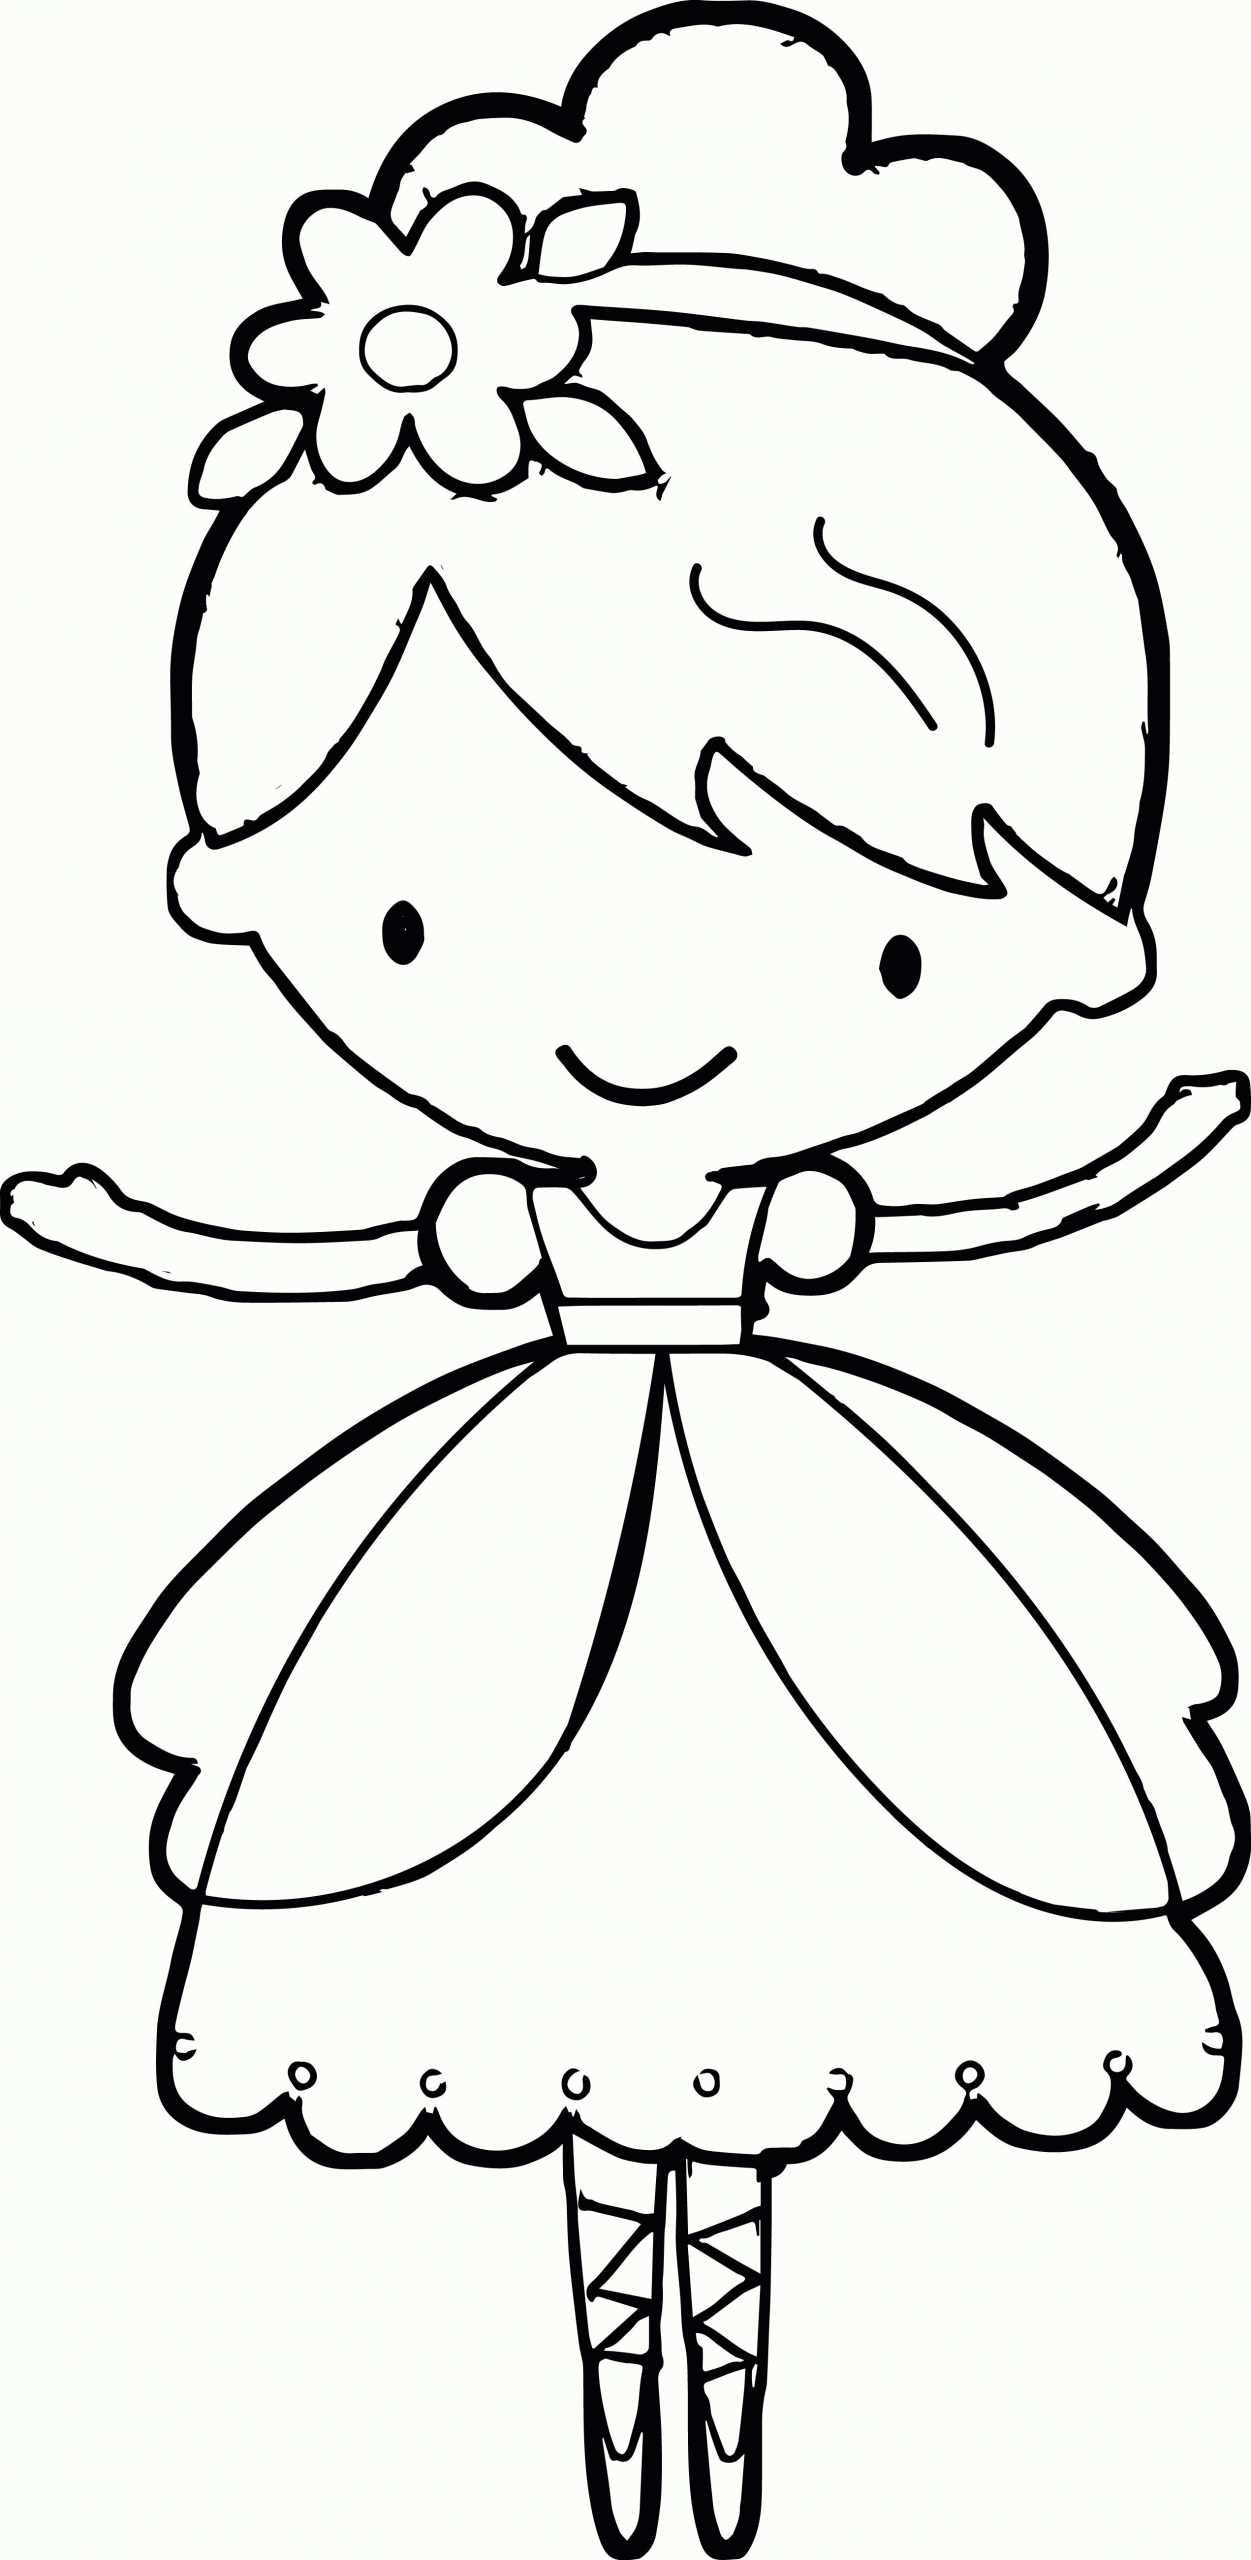 Ballerina Coloring Pages For Kids
 Hello Kitty Ballerina Coloring Pages Coloring Home